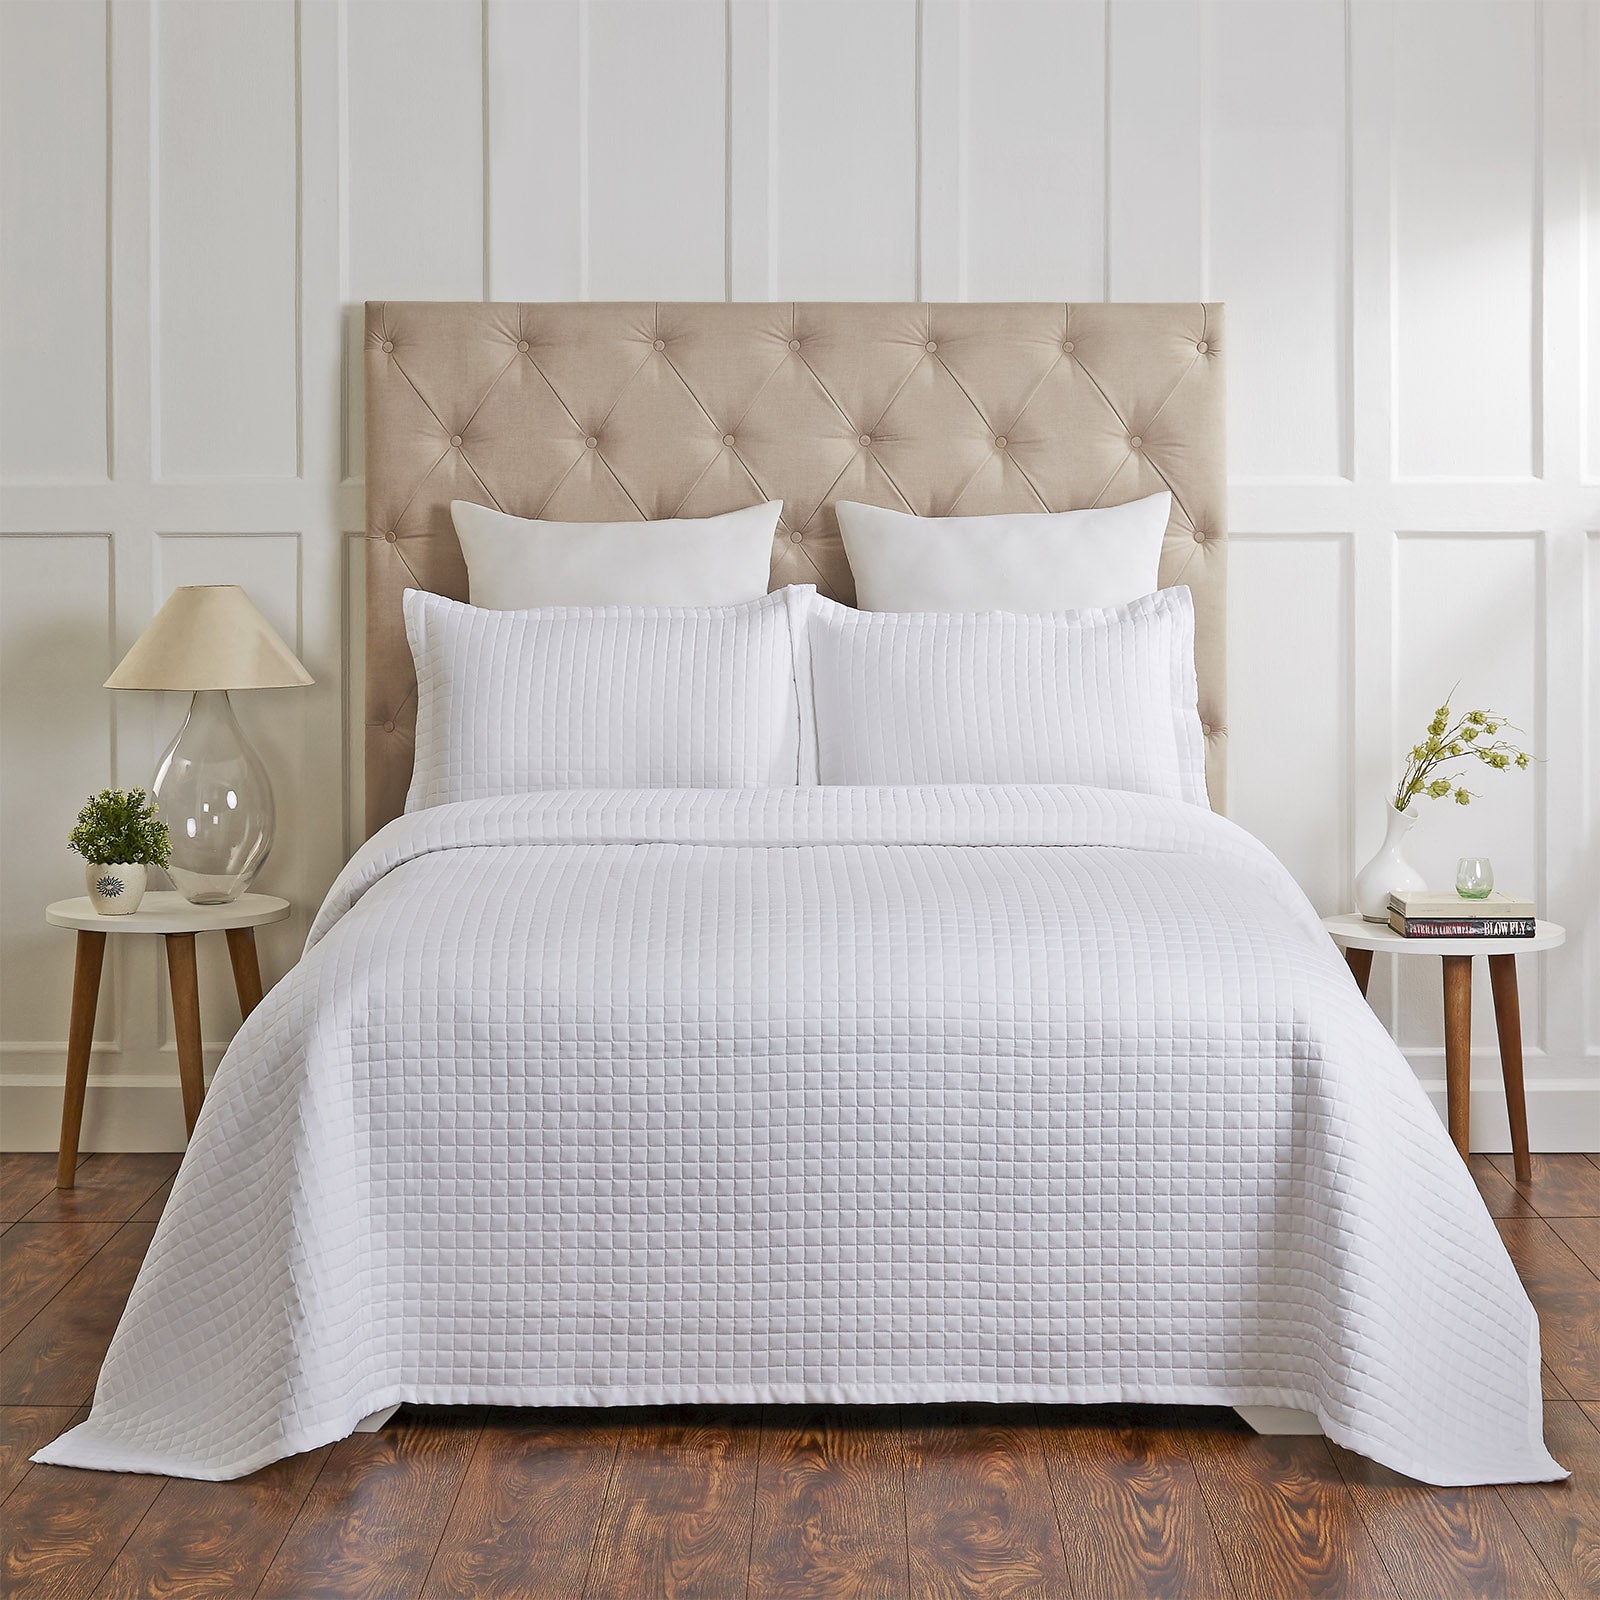 Renee Taylor Madrid Cotton Quilted Coverlet Set White Buy Queen